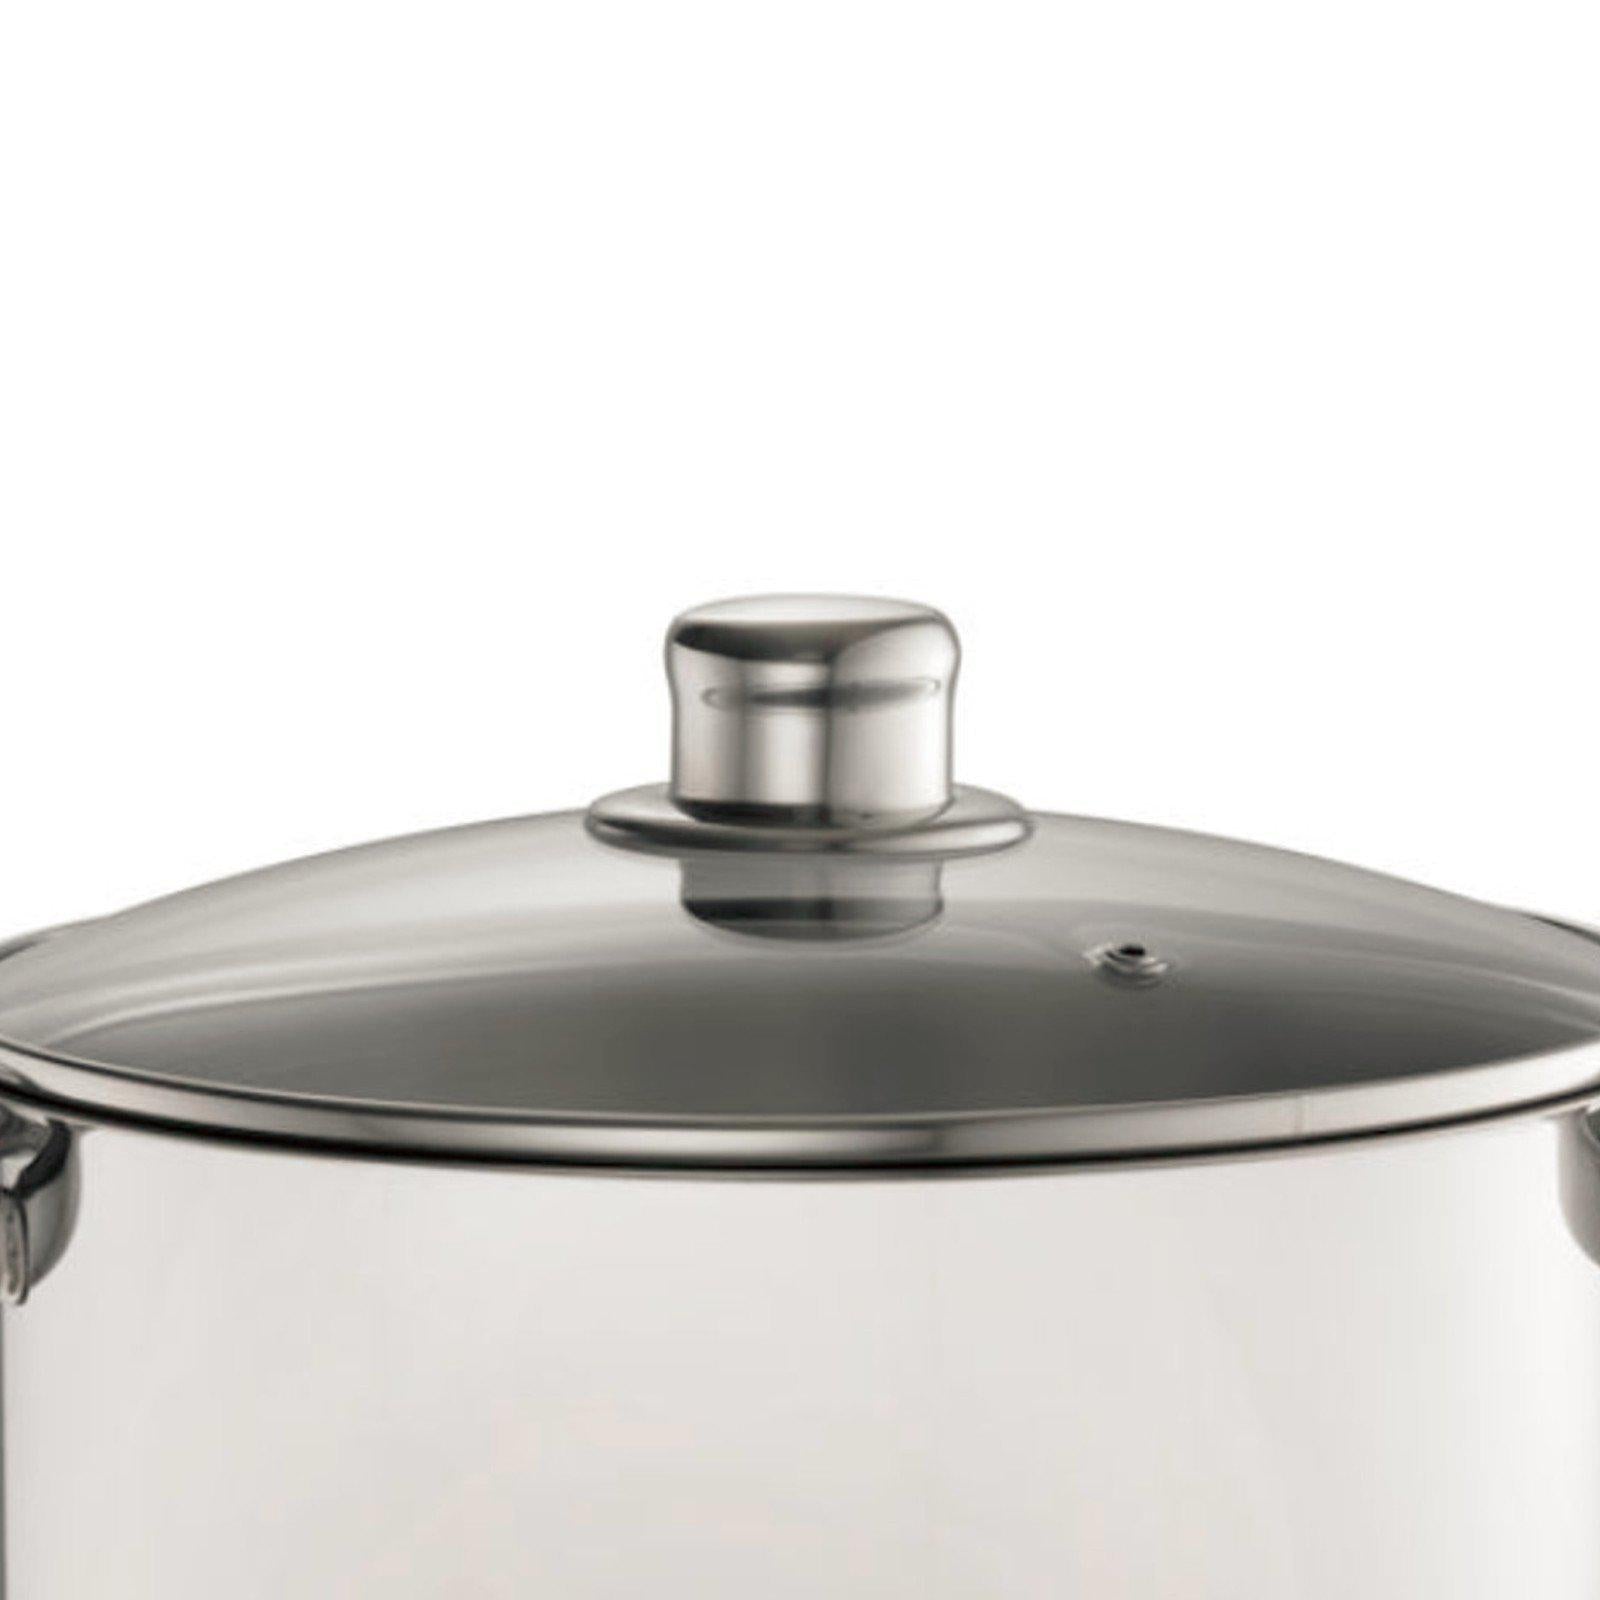 Davis & Waddell 8 Litre Stock Pot With Glass Lid-stock pot-Chef's Quality Cookware